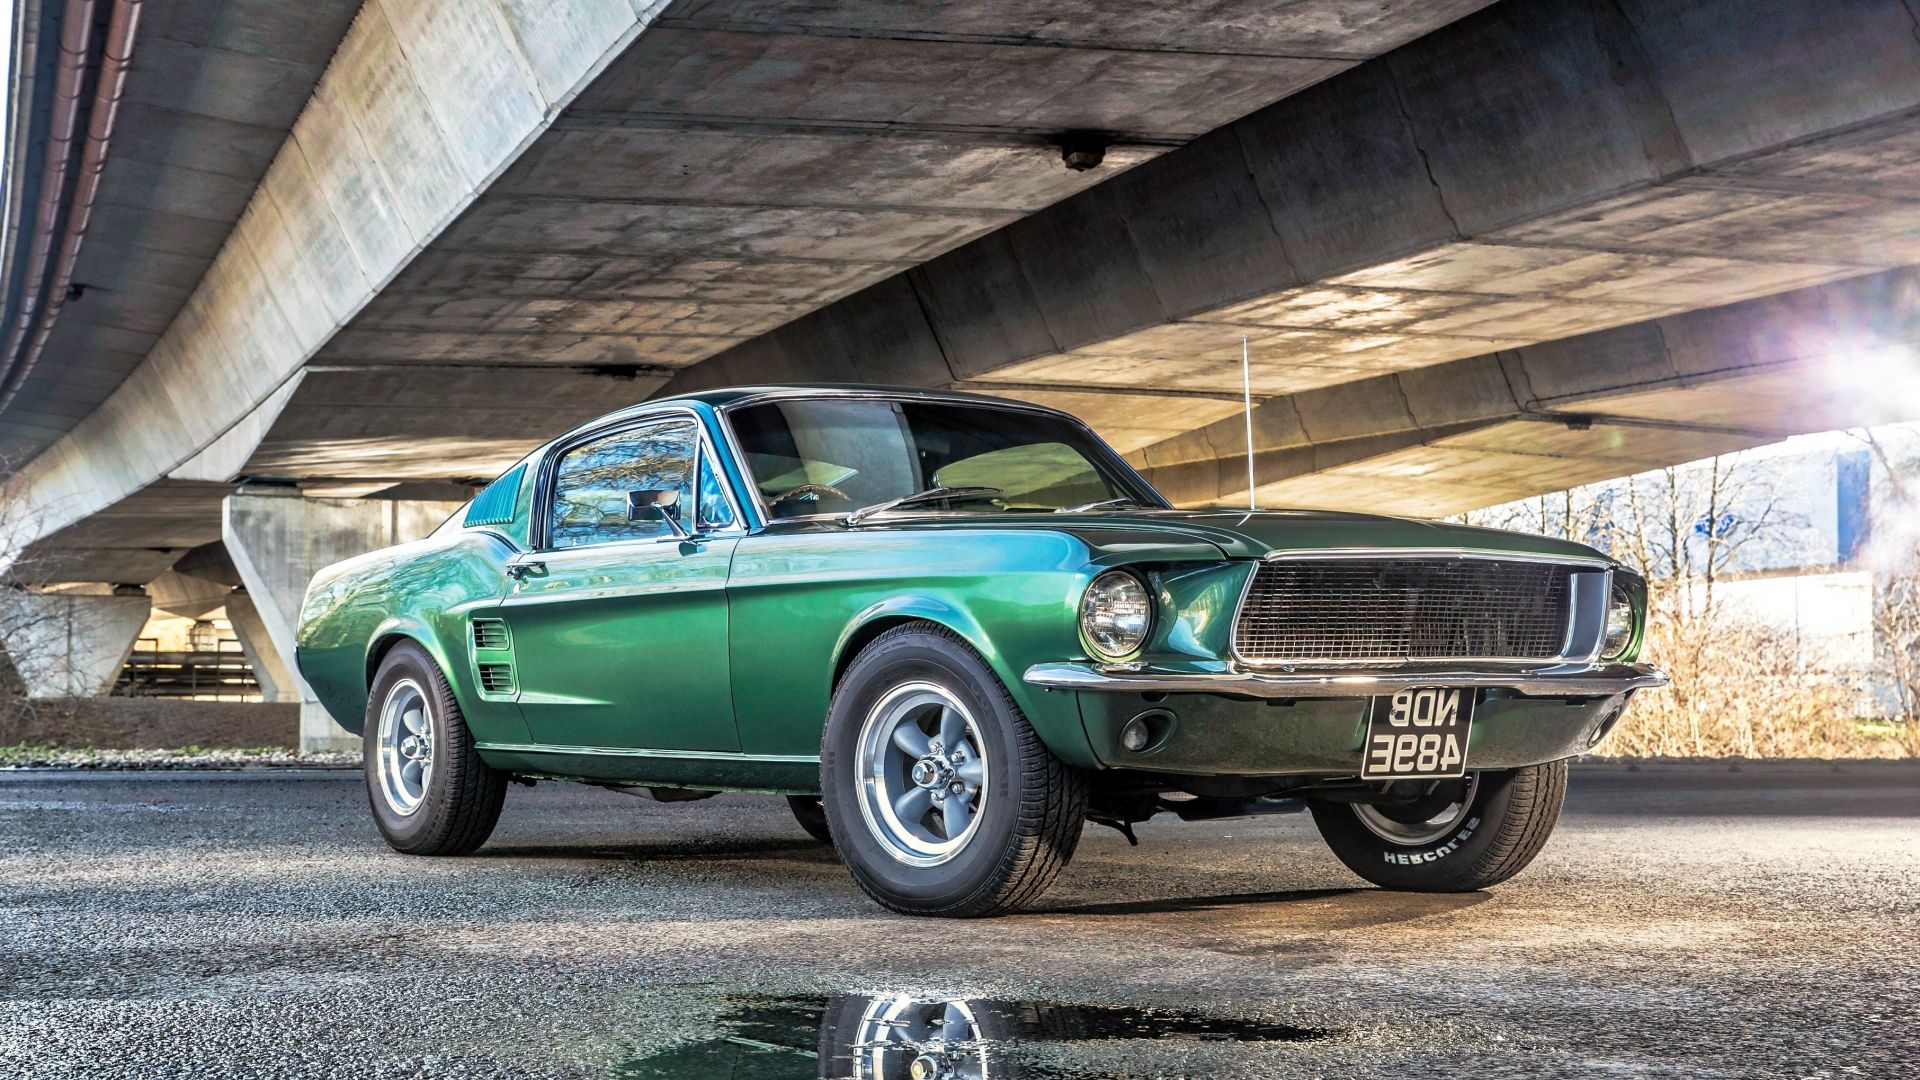 Desktop wallpapers green, muscle car, ford mustang, classic, hd image, picture, background, 73bb58